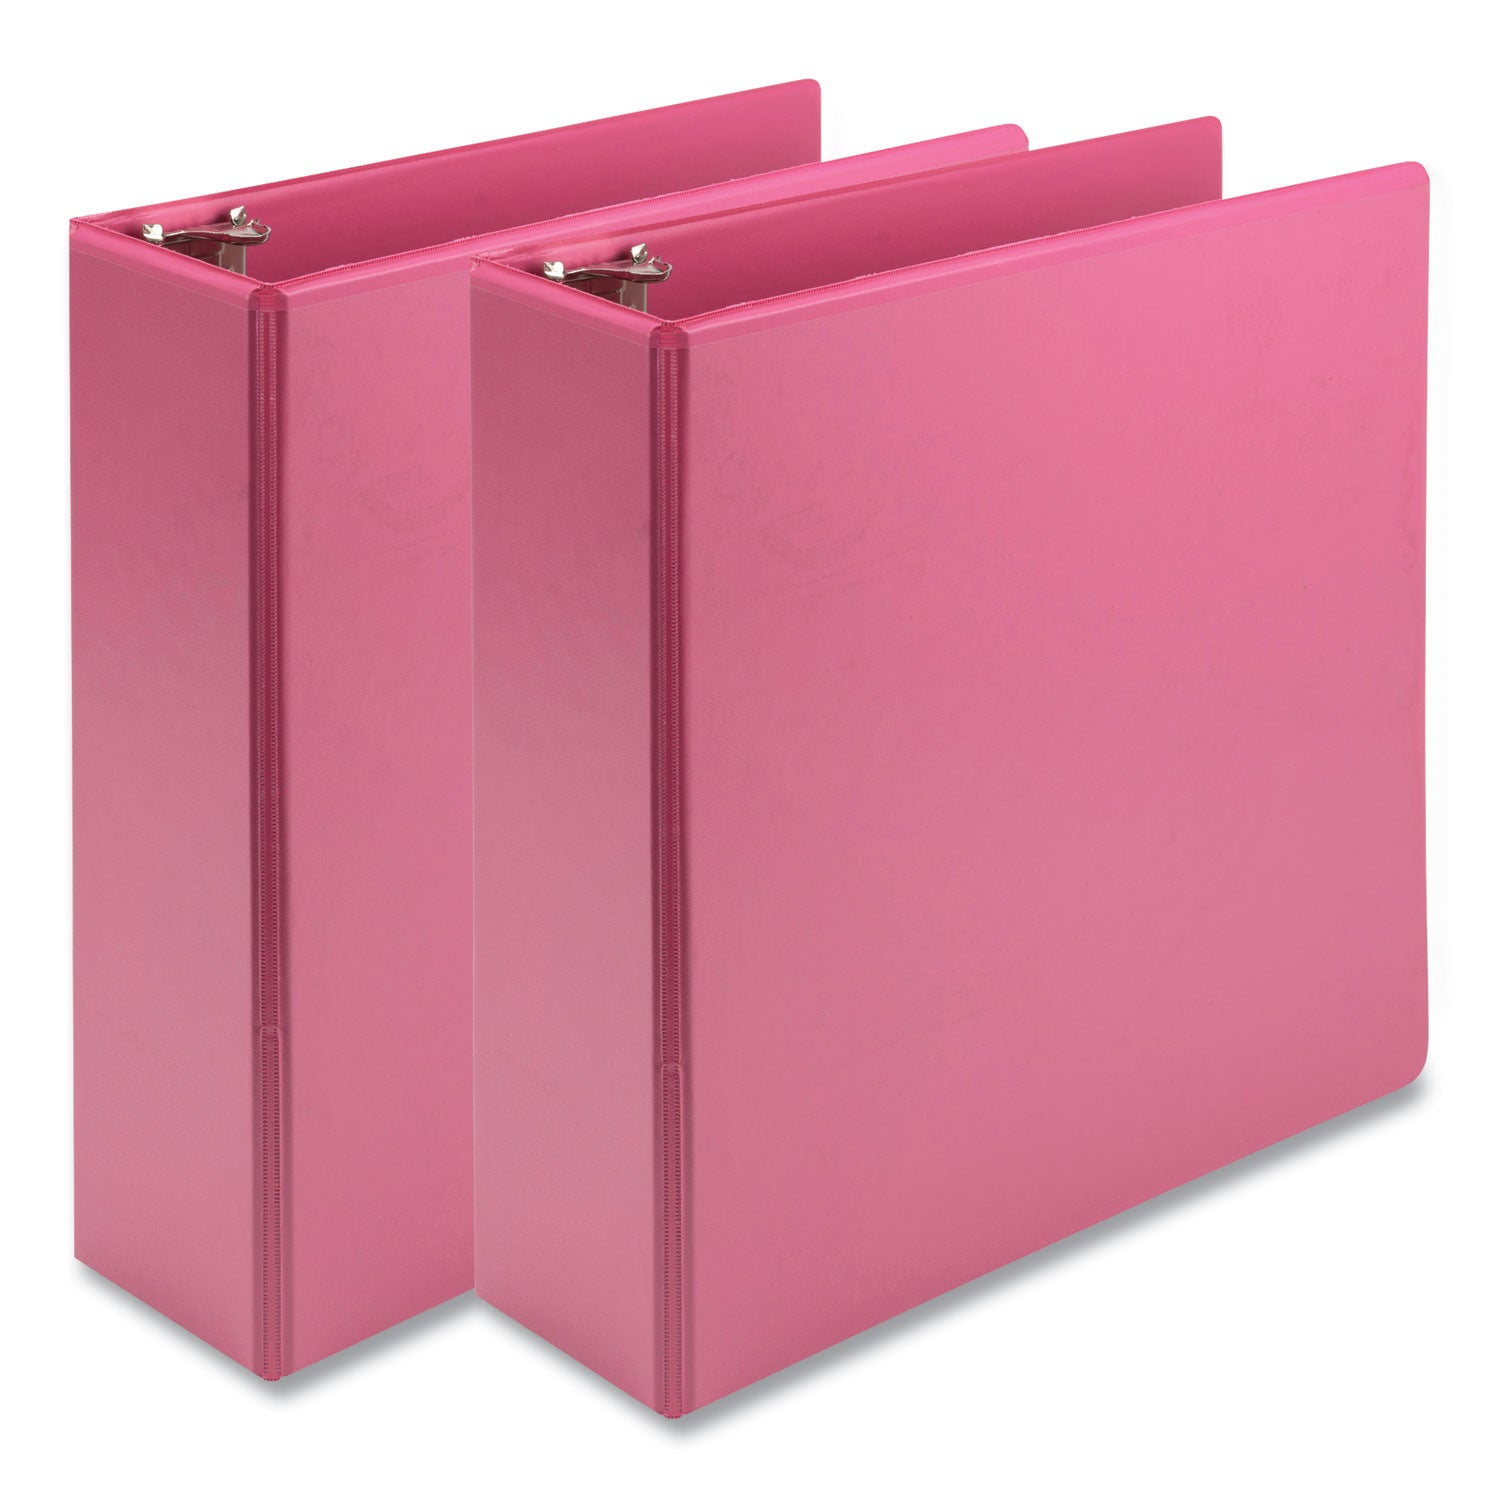 earths-choice-plant-based-economy-round-ring-view-binders-3-rings-3-capacity-11-x-85-pink-2-pack_samu86876 - 1